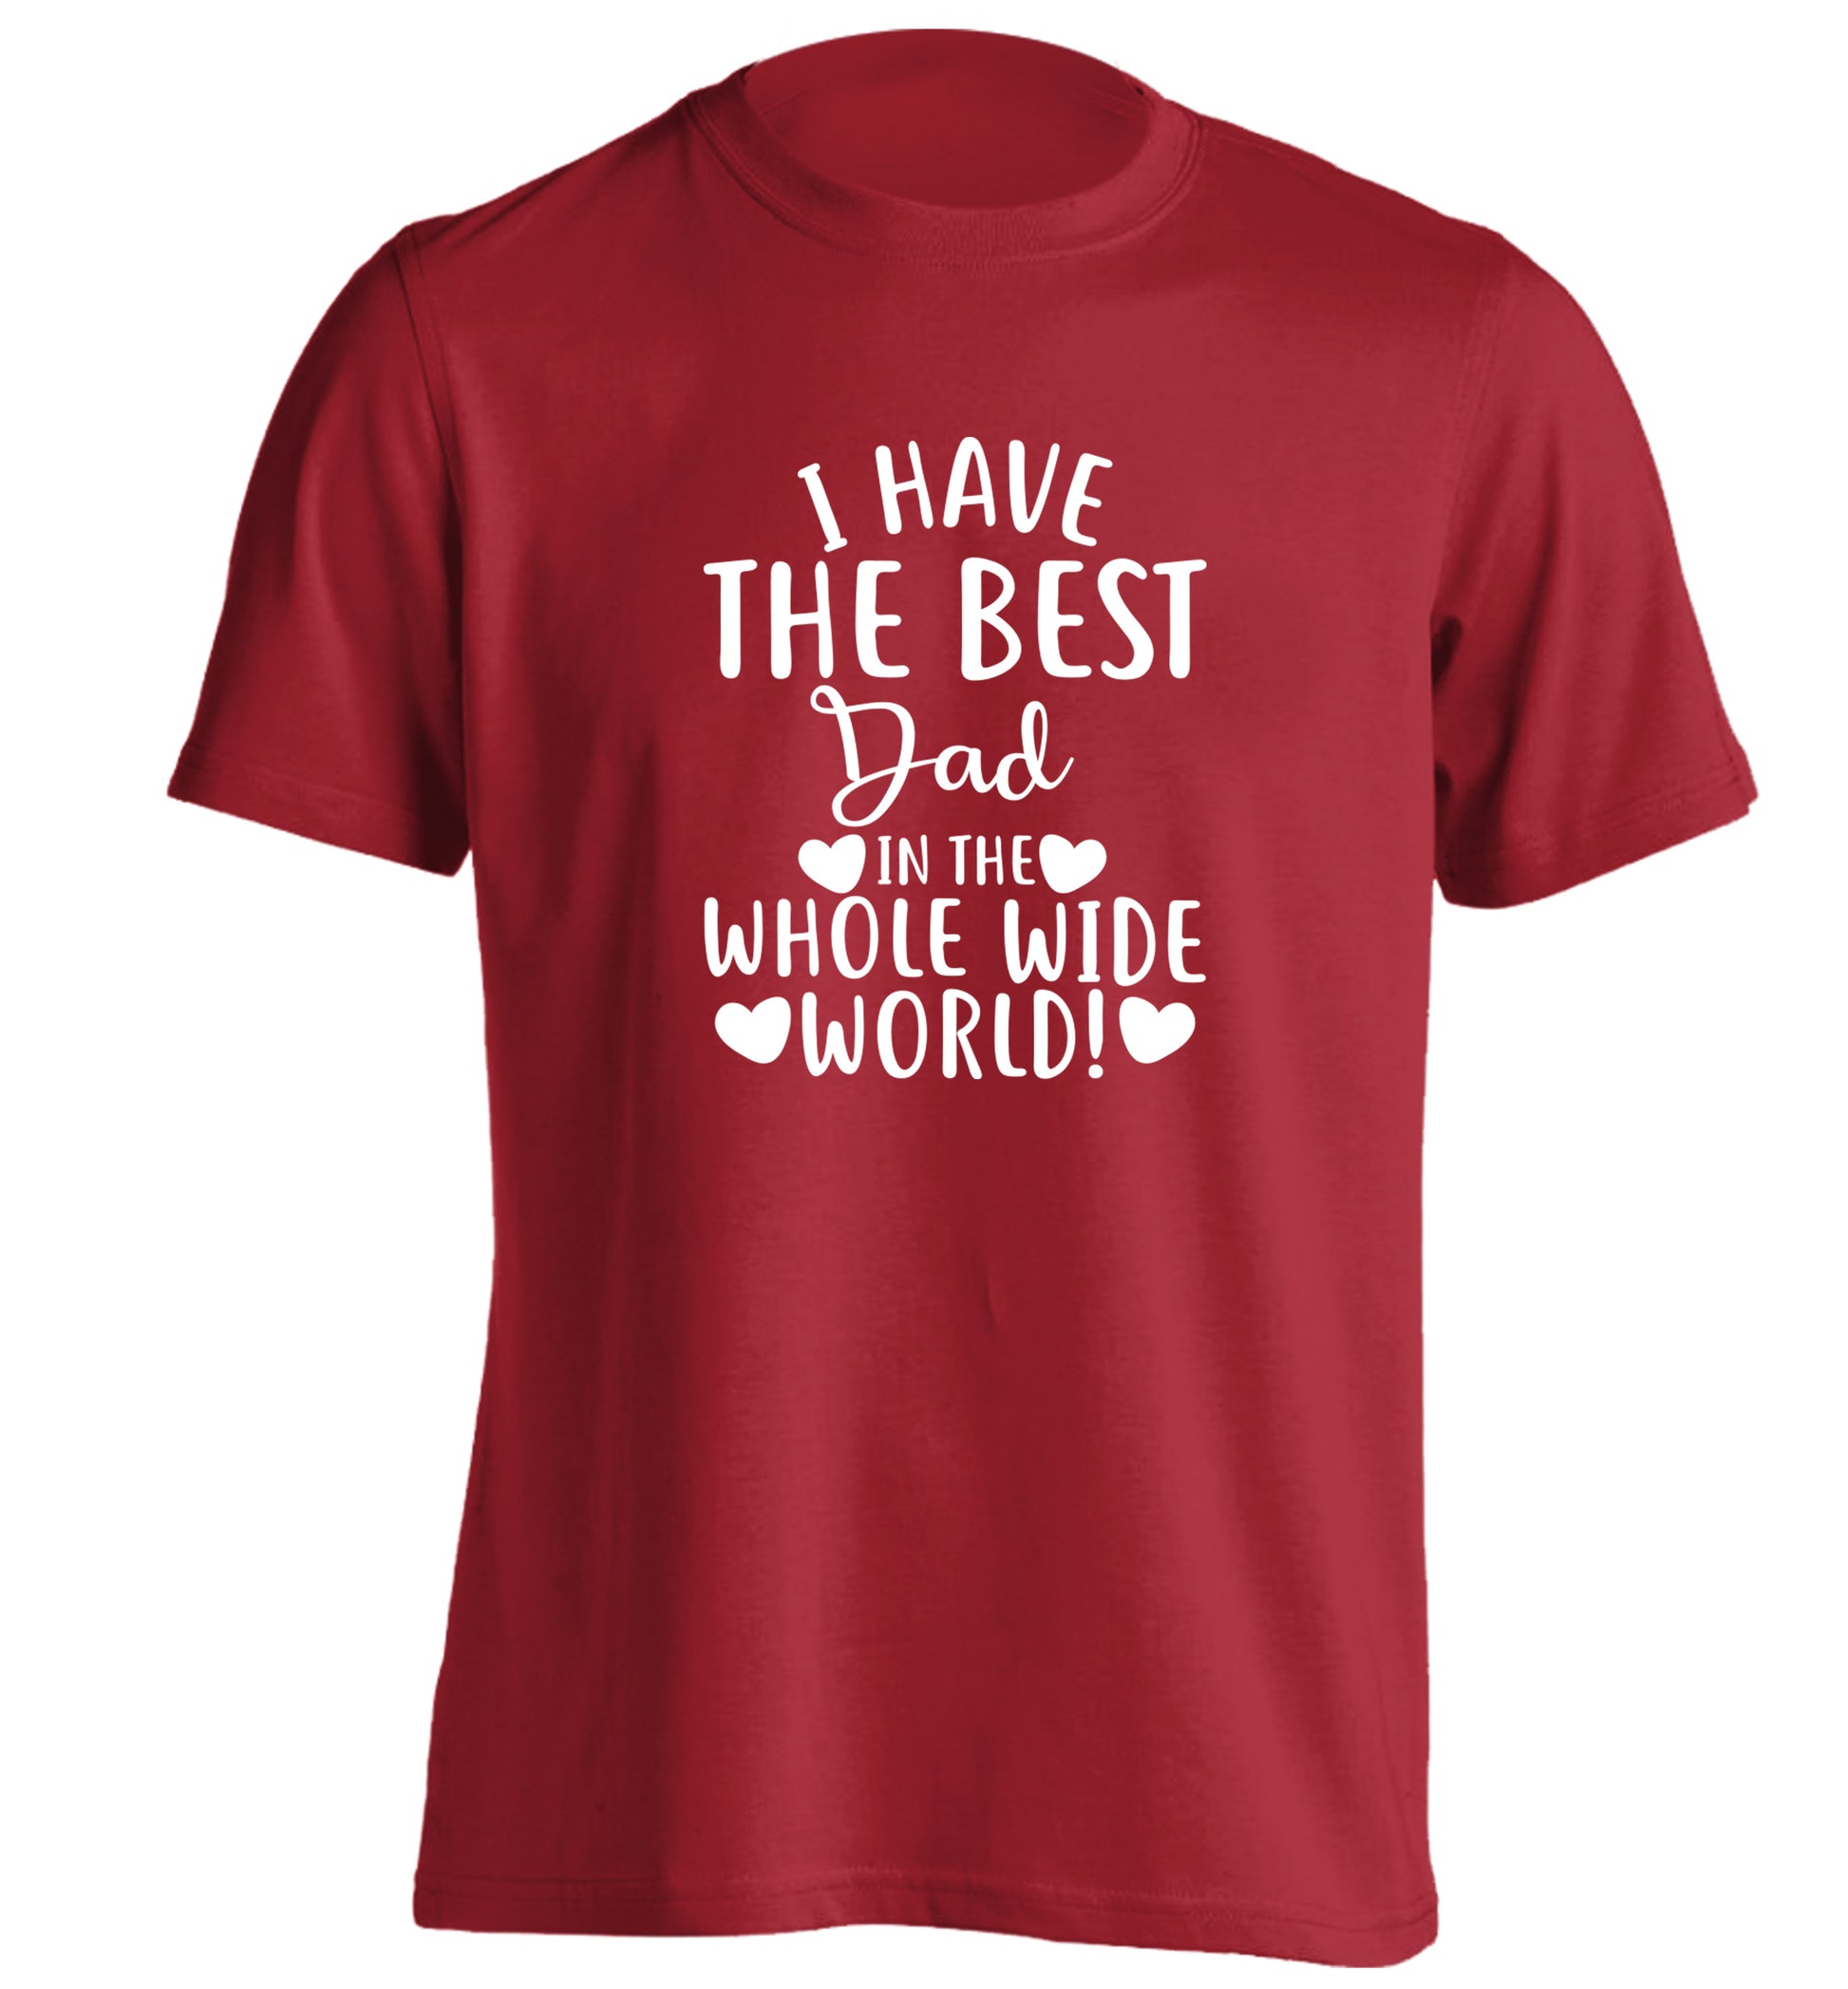 I have the best dad in the whole wide world! adults unisex red Tshirt 2XL